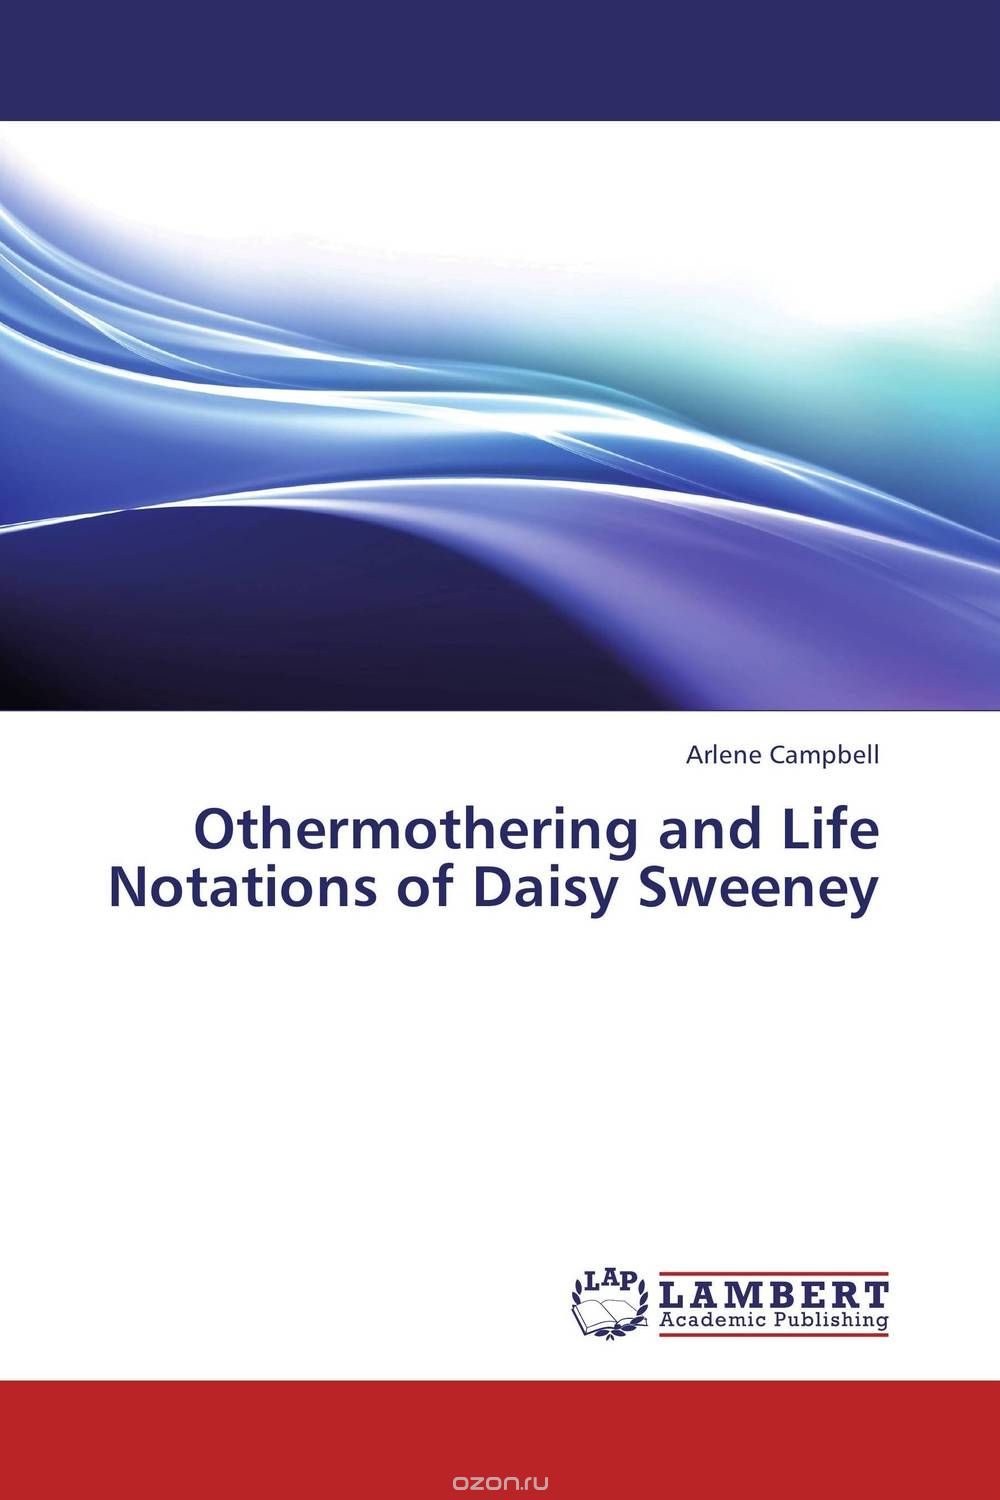 Othermothering and Life Notations of Daisy Sweeney